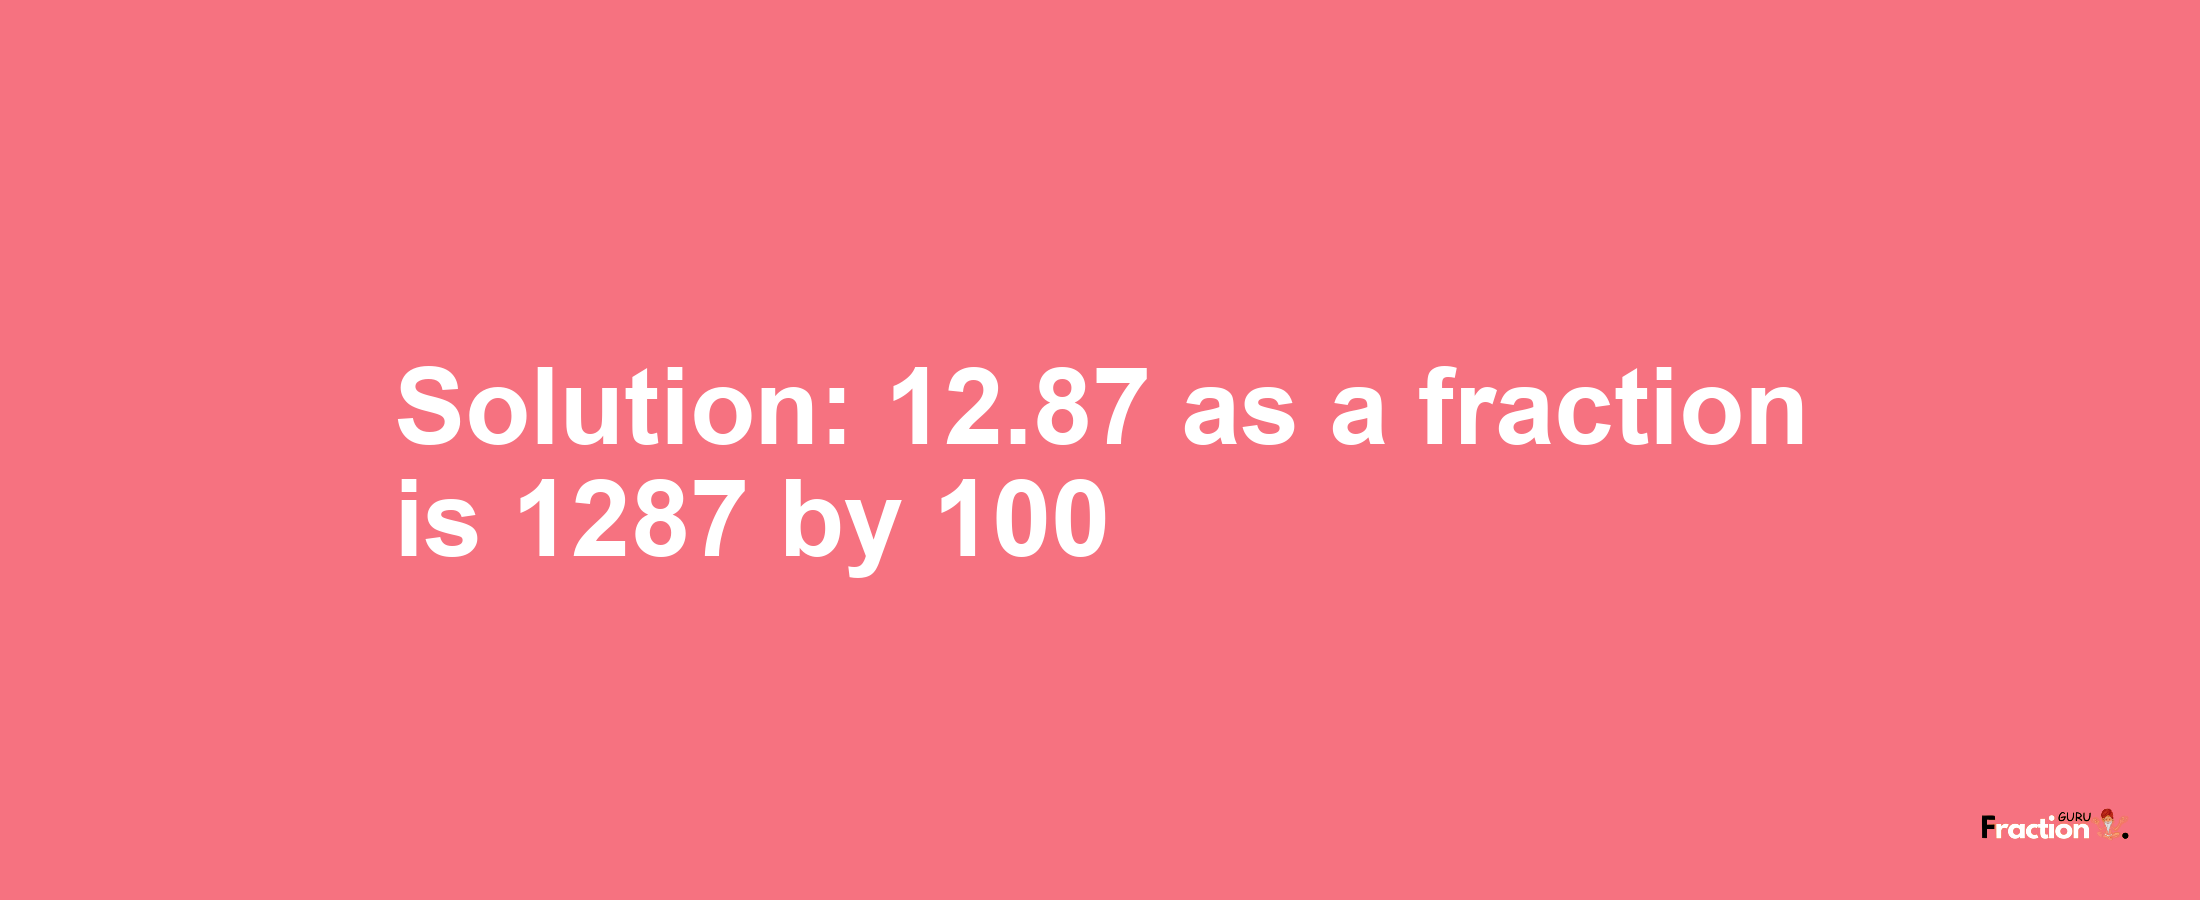 Solution:12.87 as a fraction is 1287/100